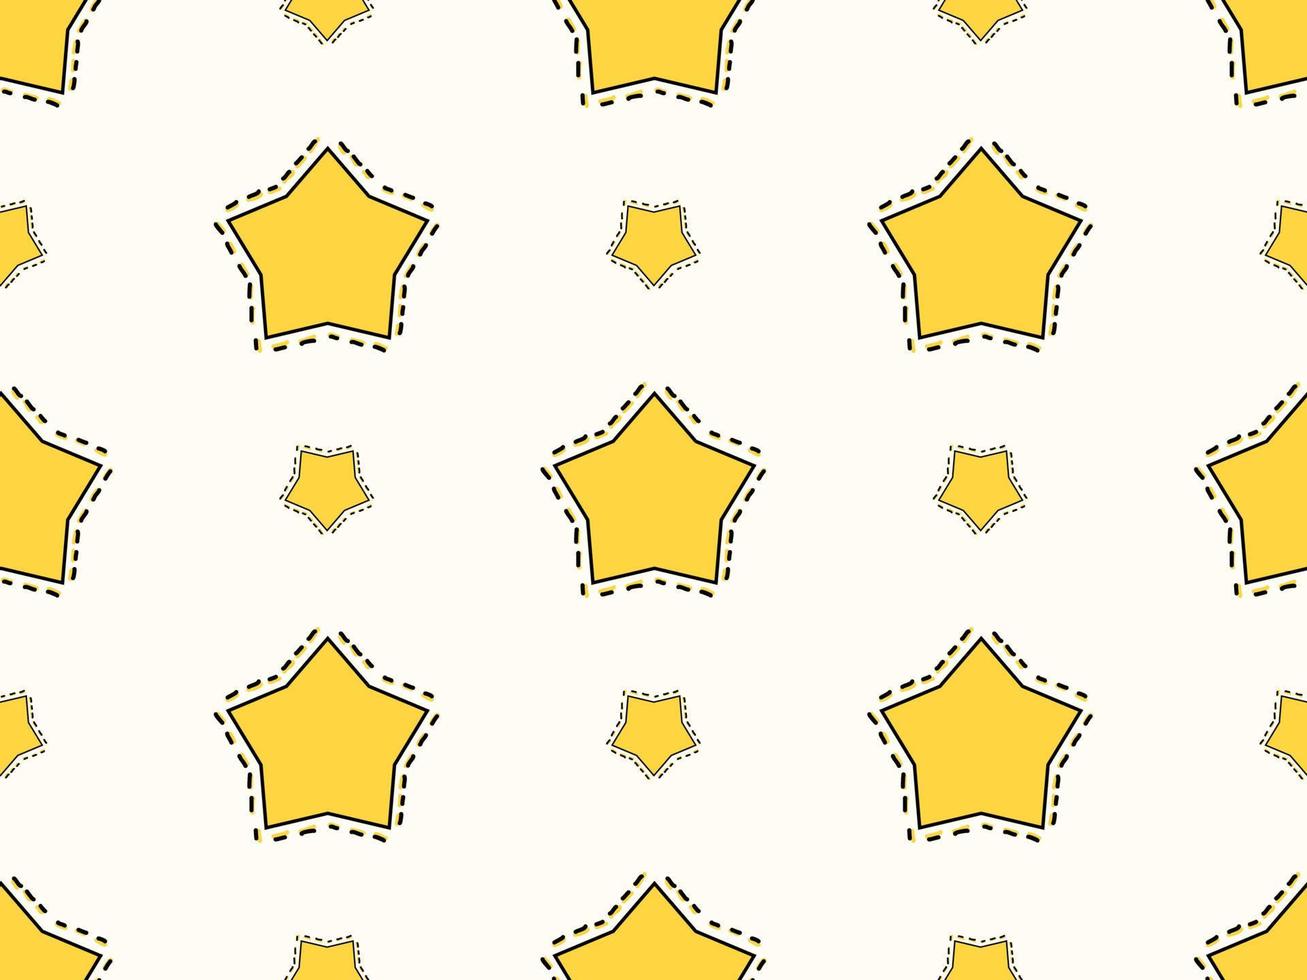 Star cartoon character seamless pattern on white background vector